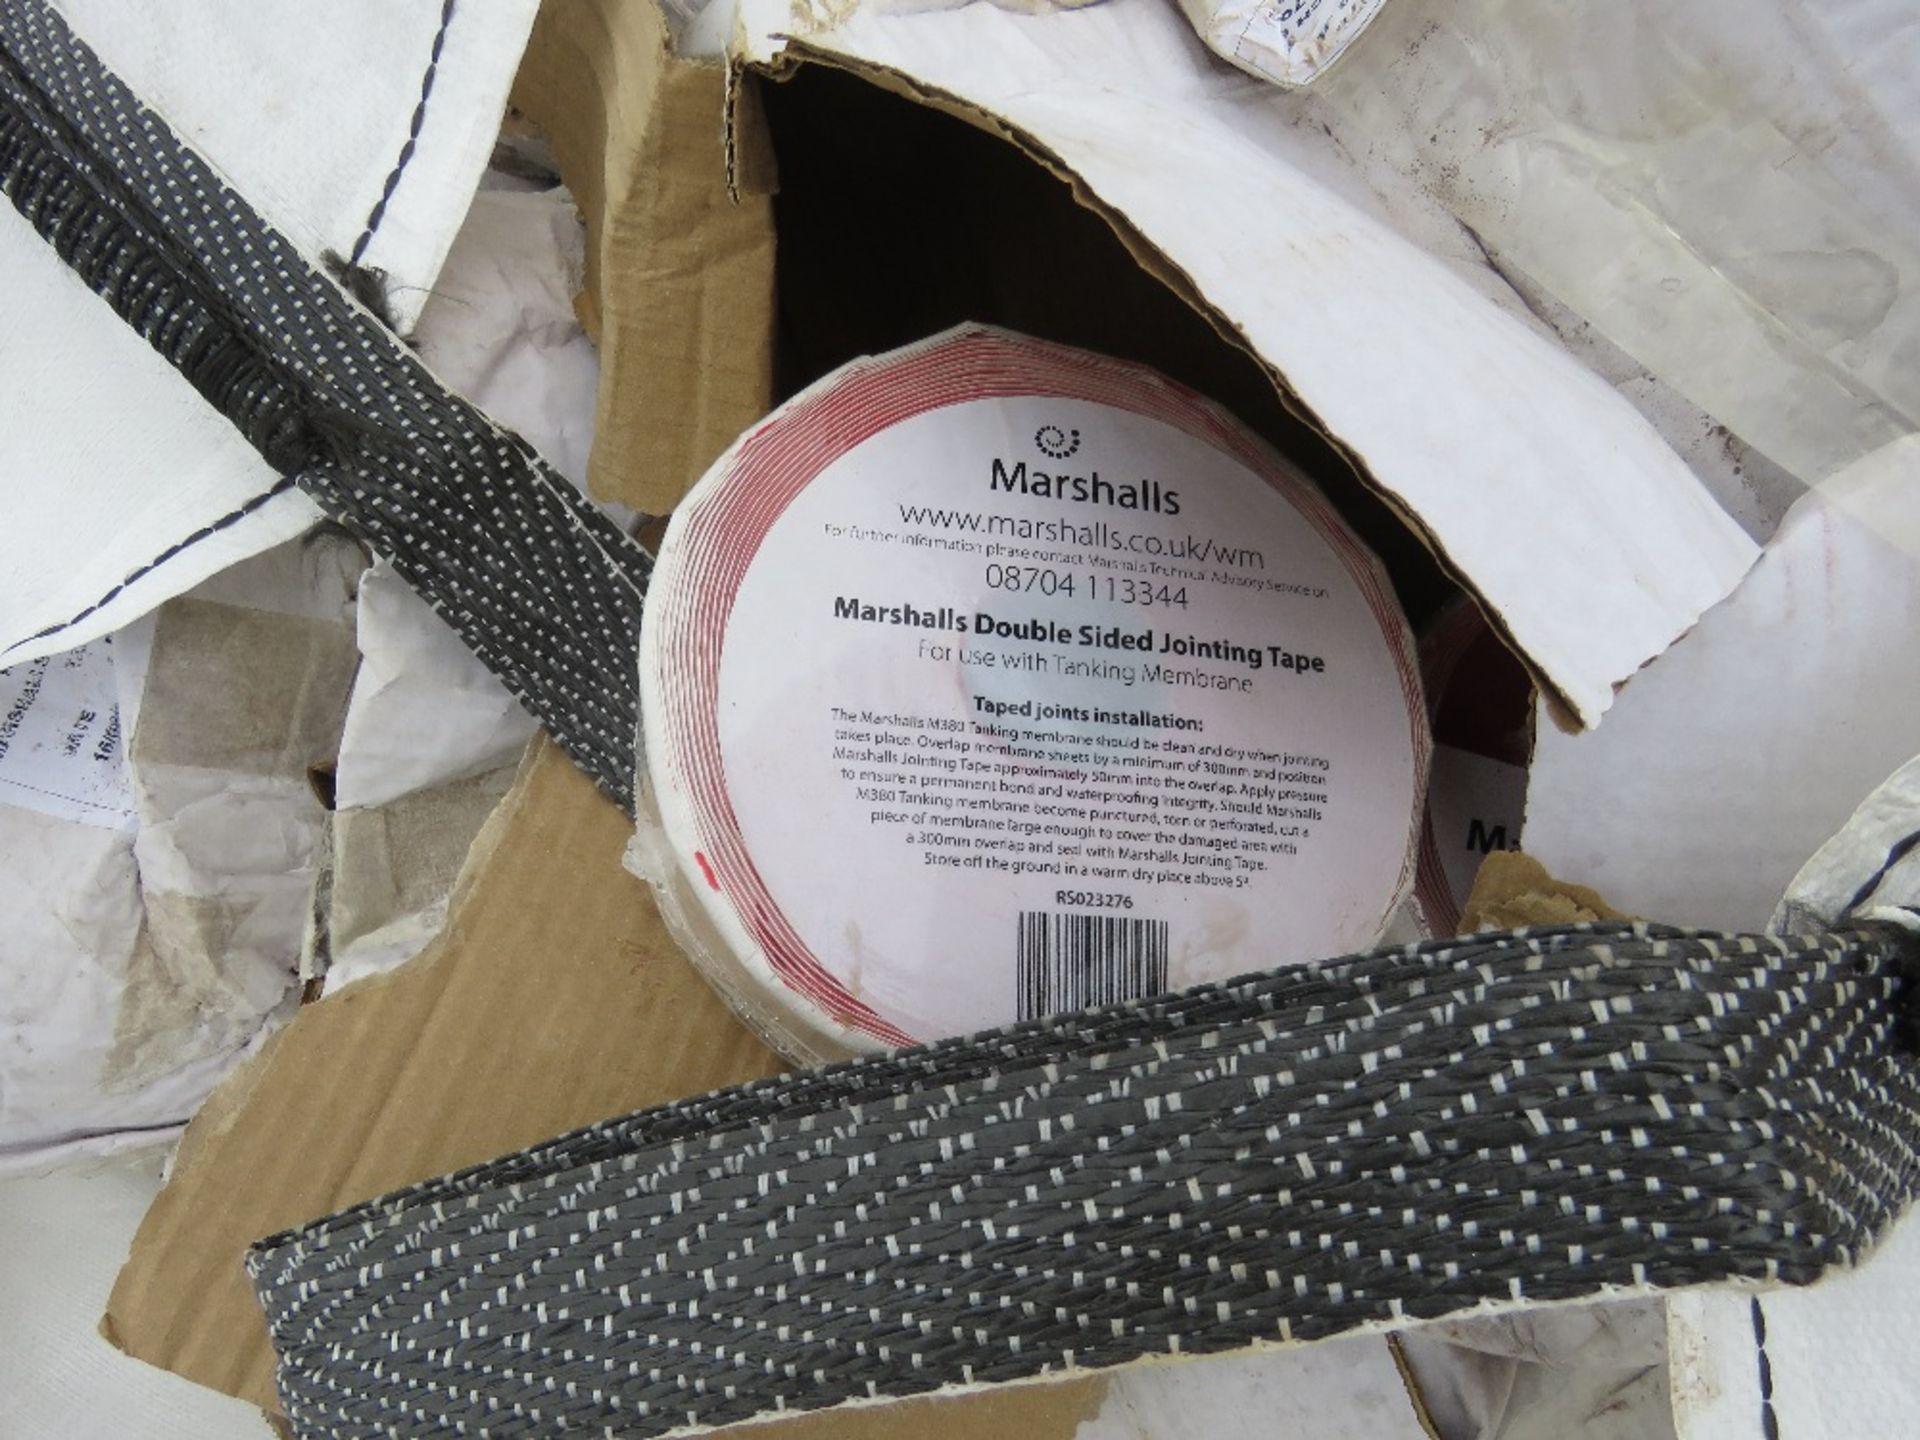 BULK BAG CONTAINING MARSHALLS DOUBLE SIDED JOINTING TAPES......THIS LOT IS SOLD UNDER THE AUCTIONEER - Image 2 of 4